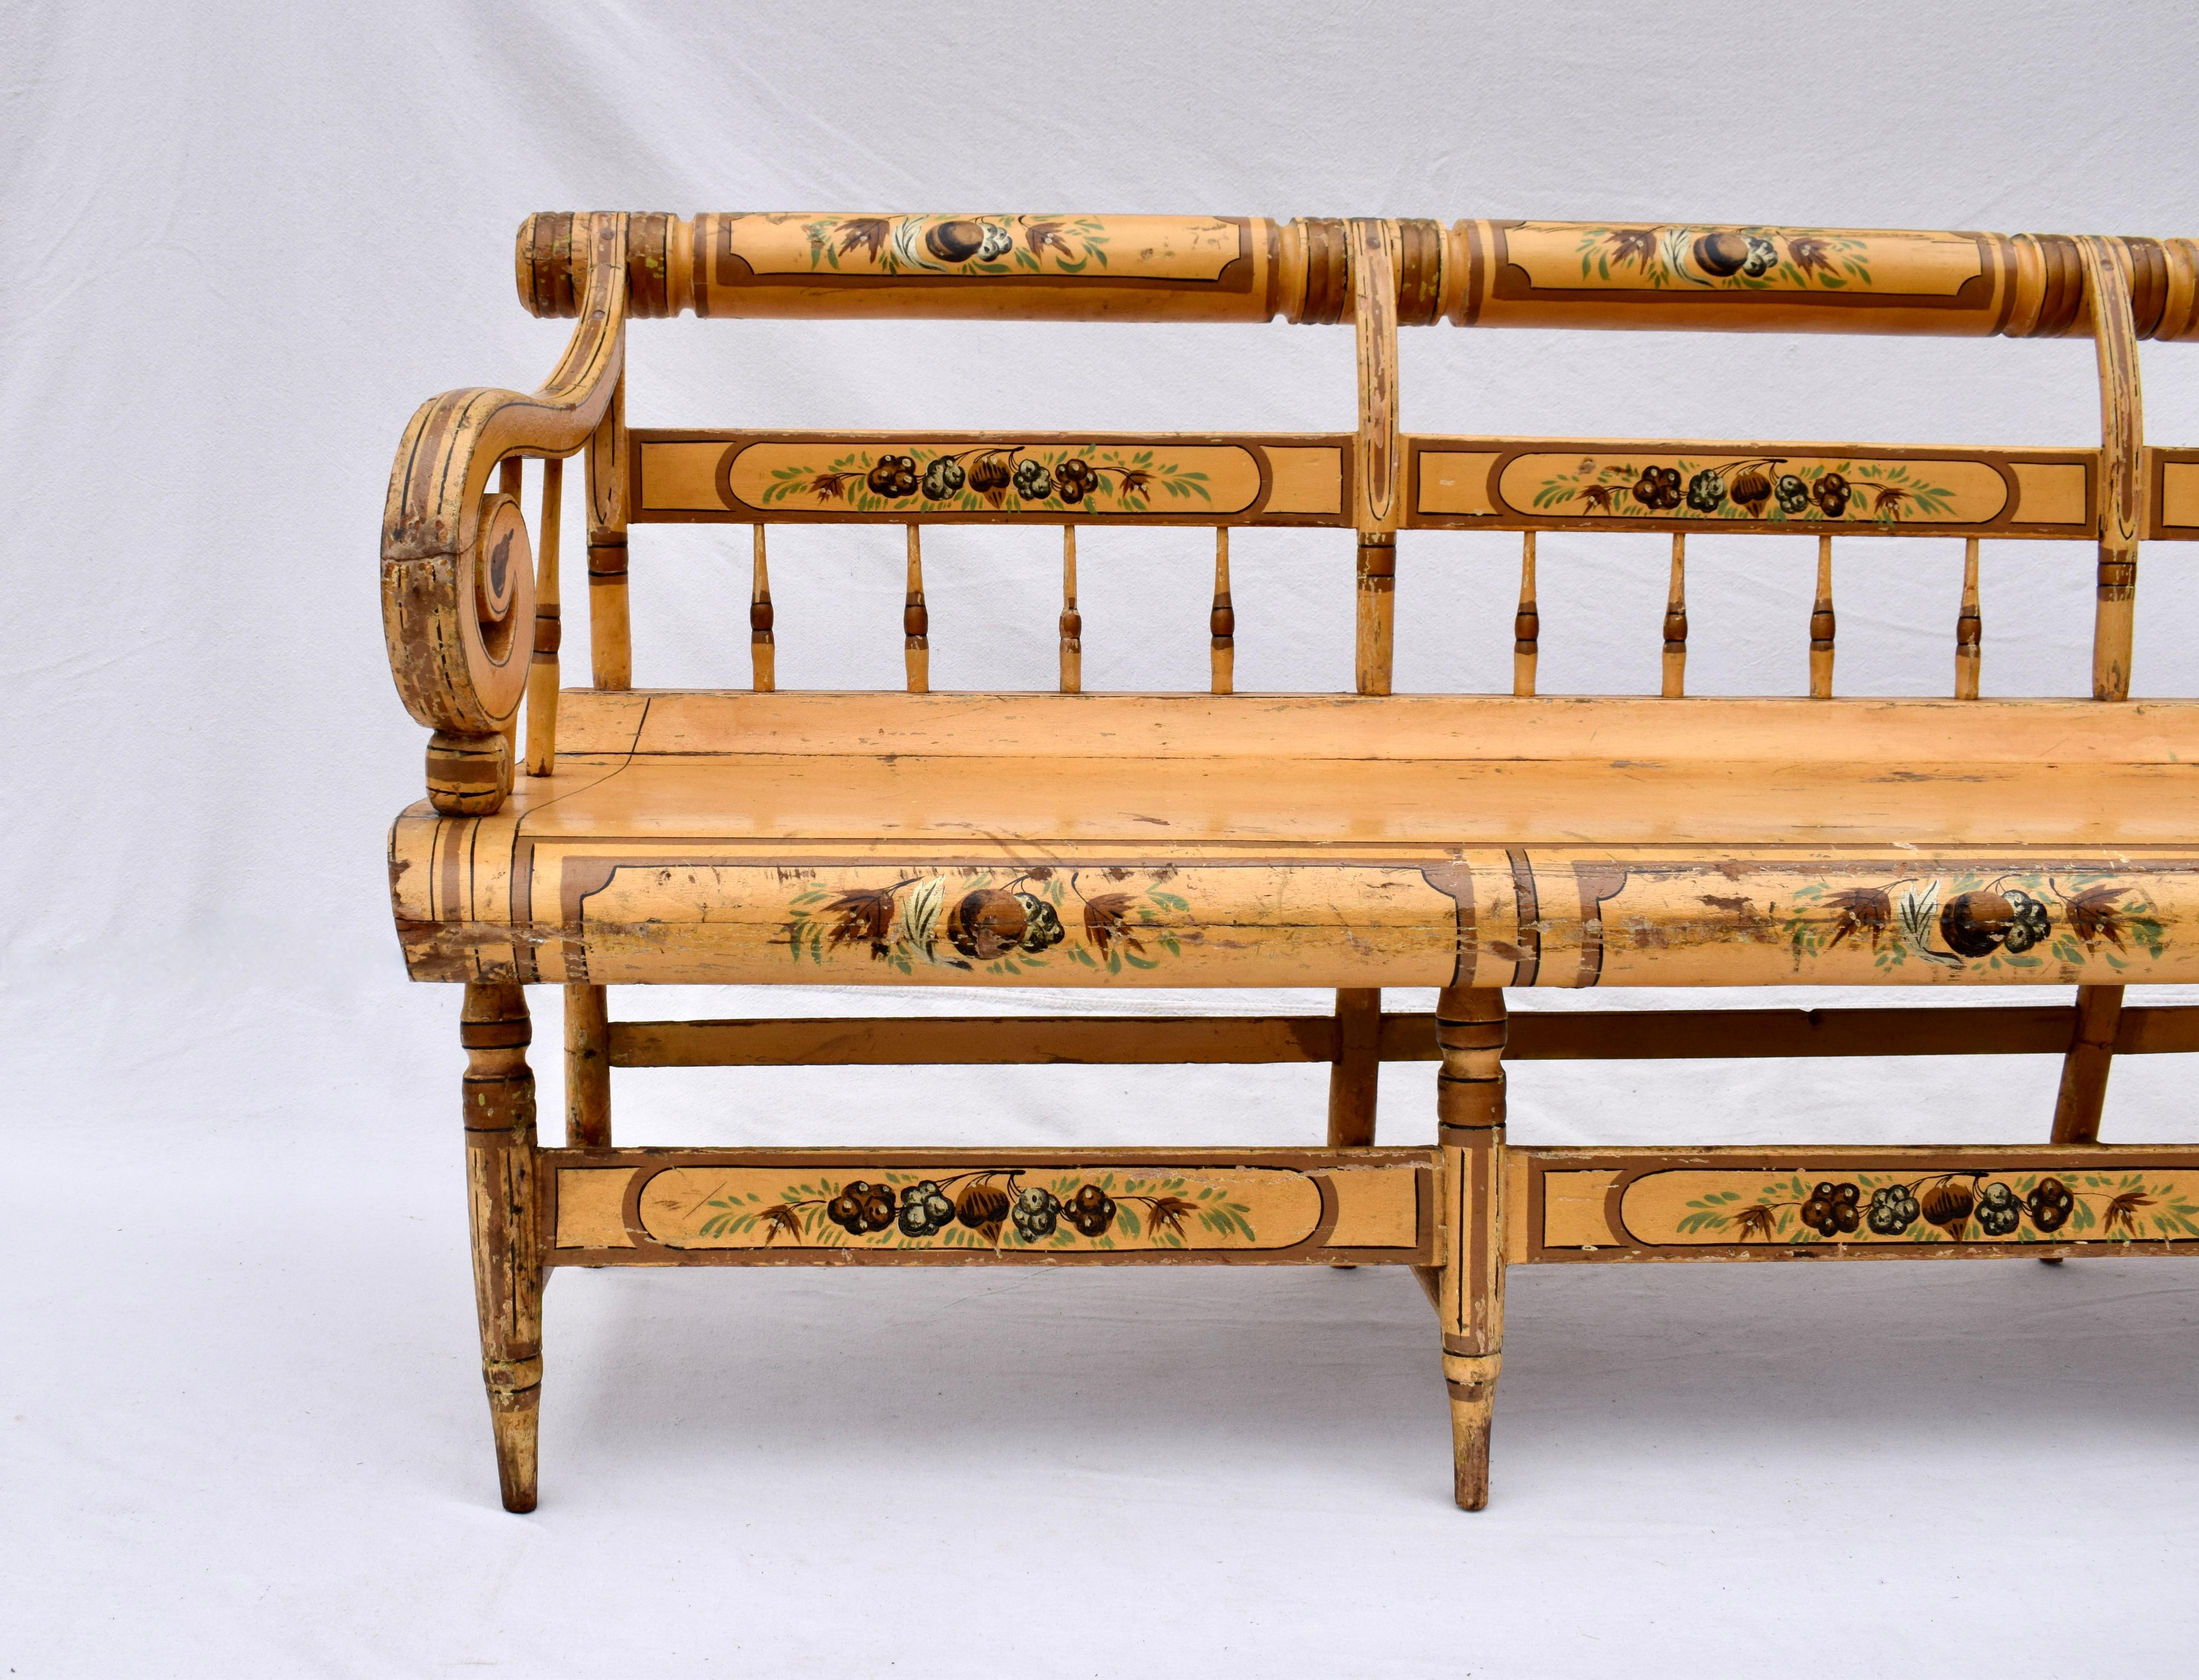 Hand-Painted 19th C. American Federal Floral Painted Bench For Sale